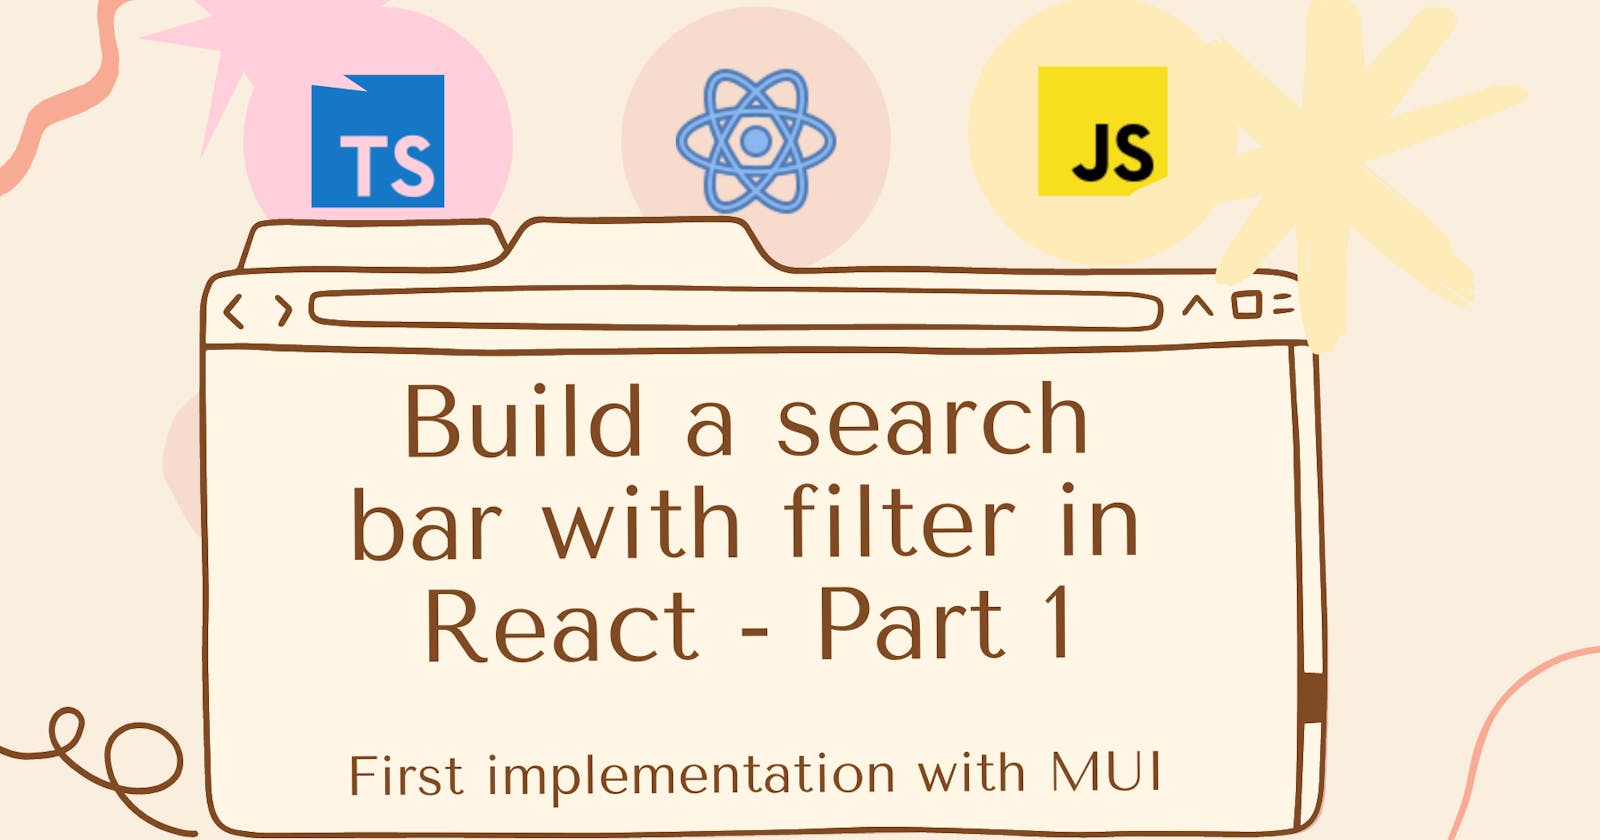 Build a search bar with filter in React - Part 1